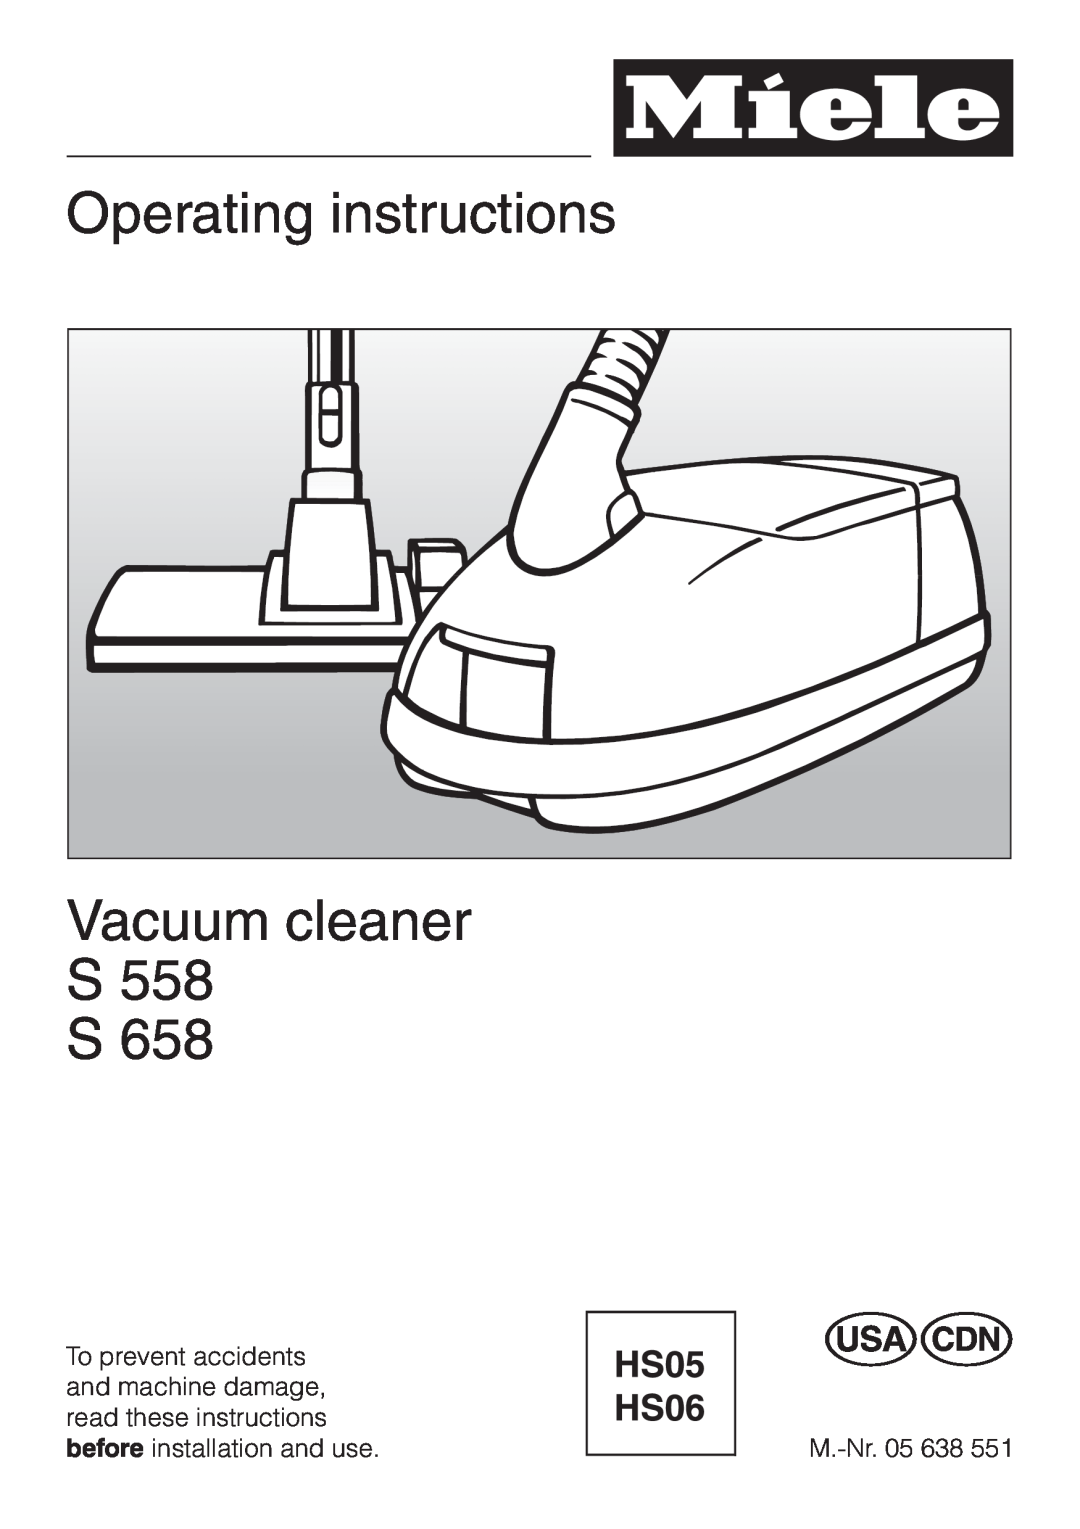 Miele S 558 manual Operating instructions, Vacuum cleaner S558 S658 